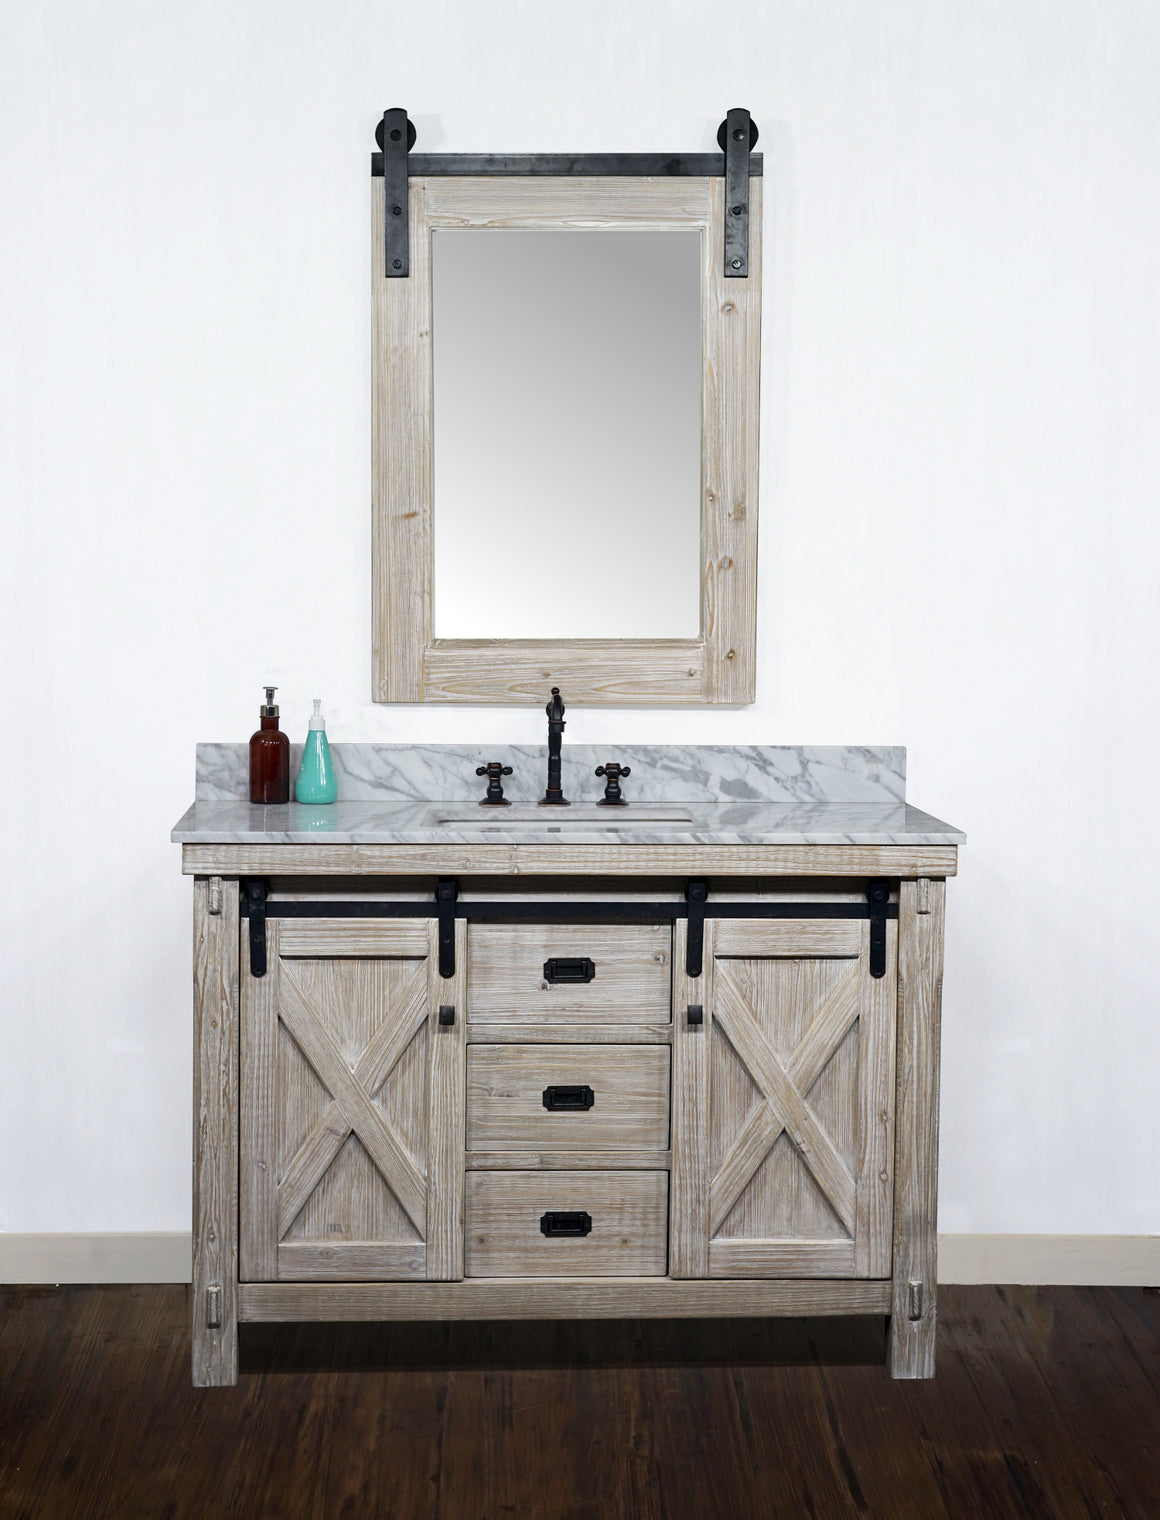 48"RUSTIC SOLID FIR BARN DOOR STYLE SINGLE SINK VANITY WITH CARRARA WHITE MARBLE TOP WITH RECTANGULAR SINK-NO FAUCET